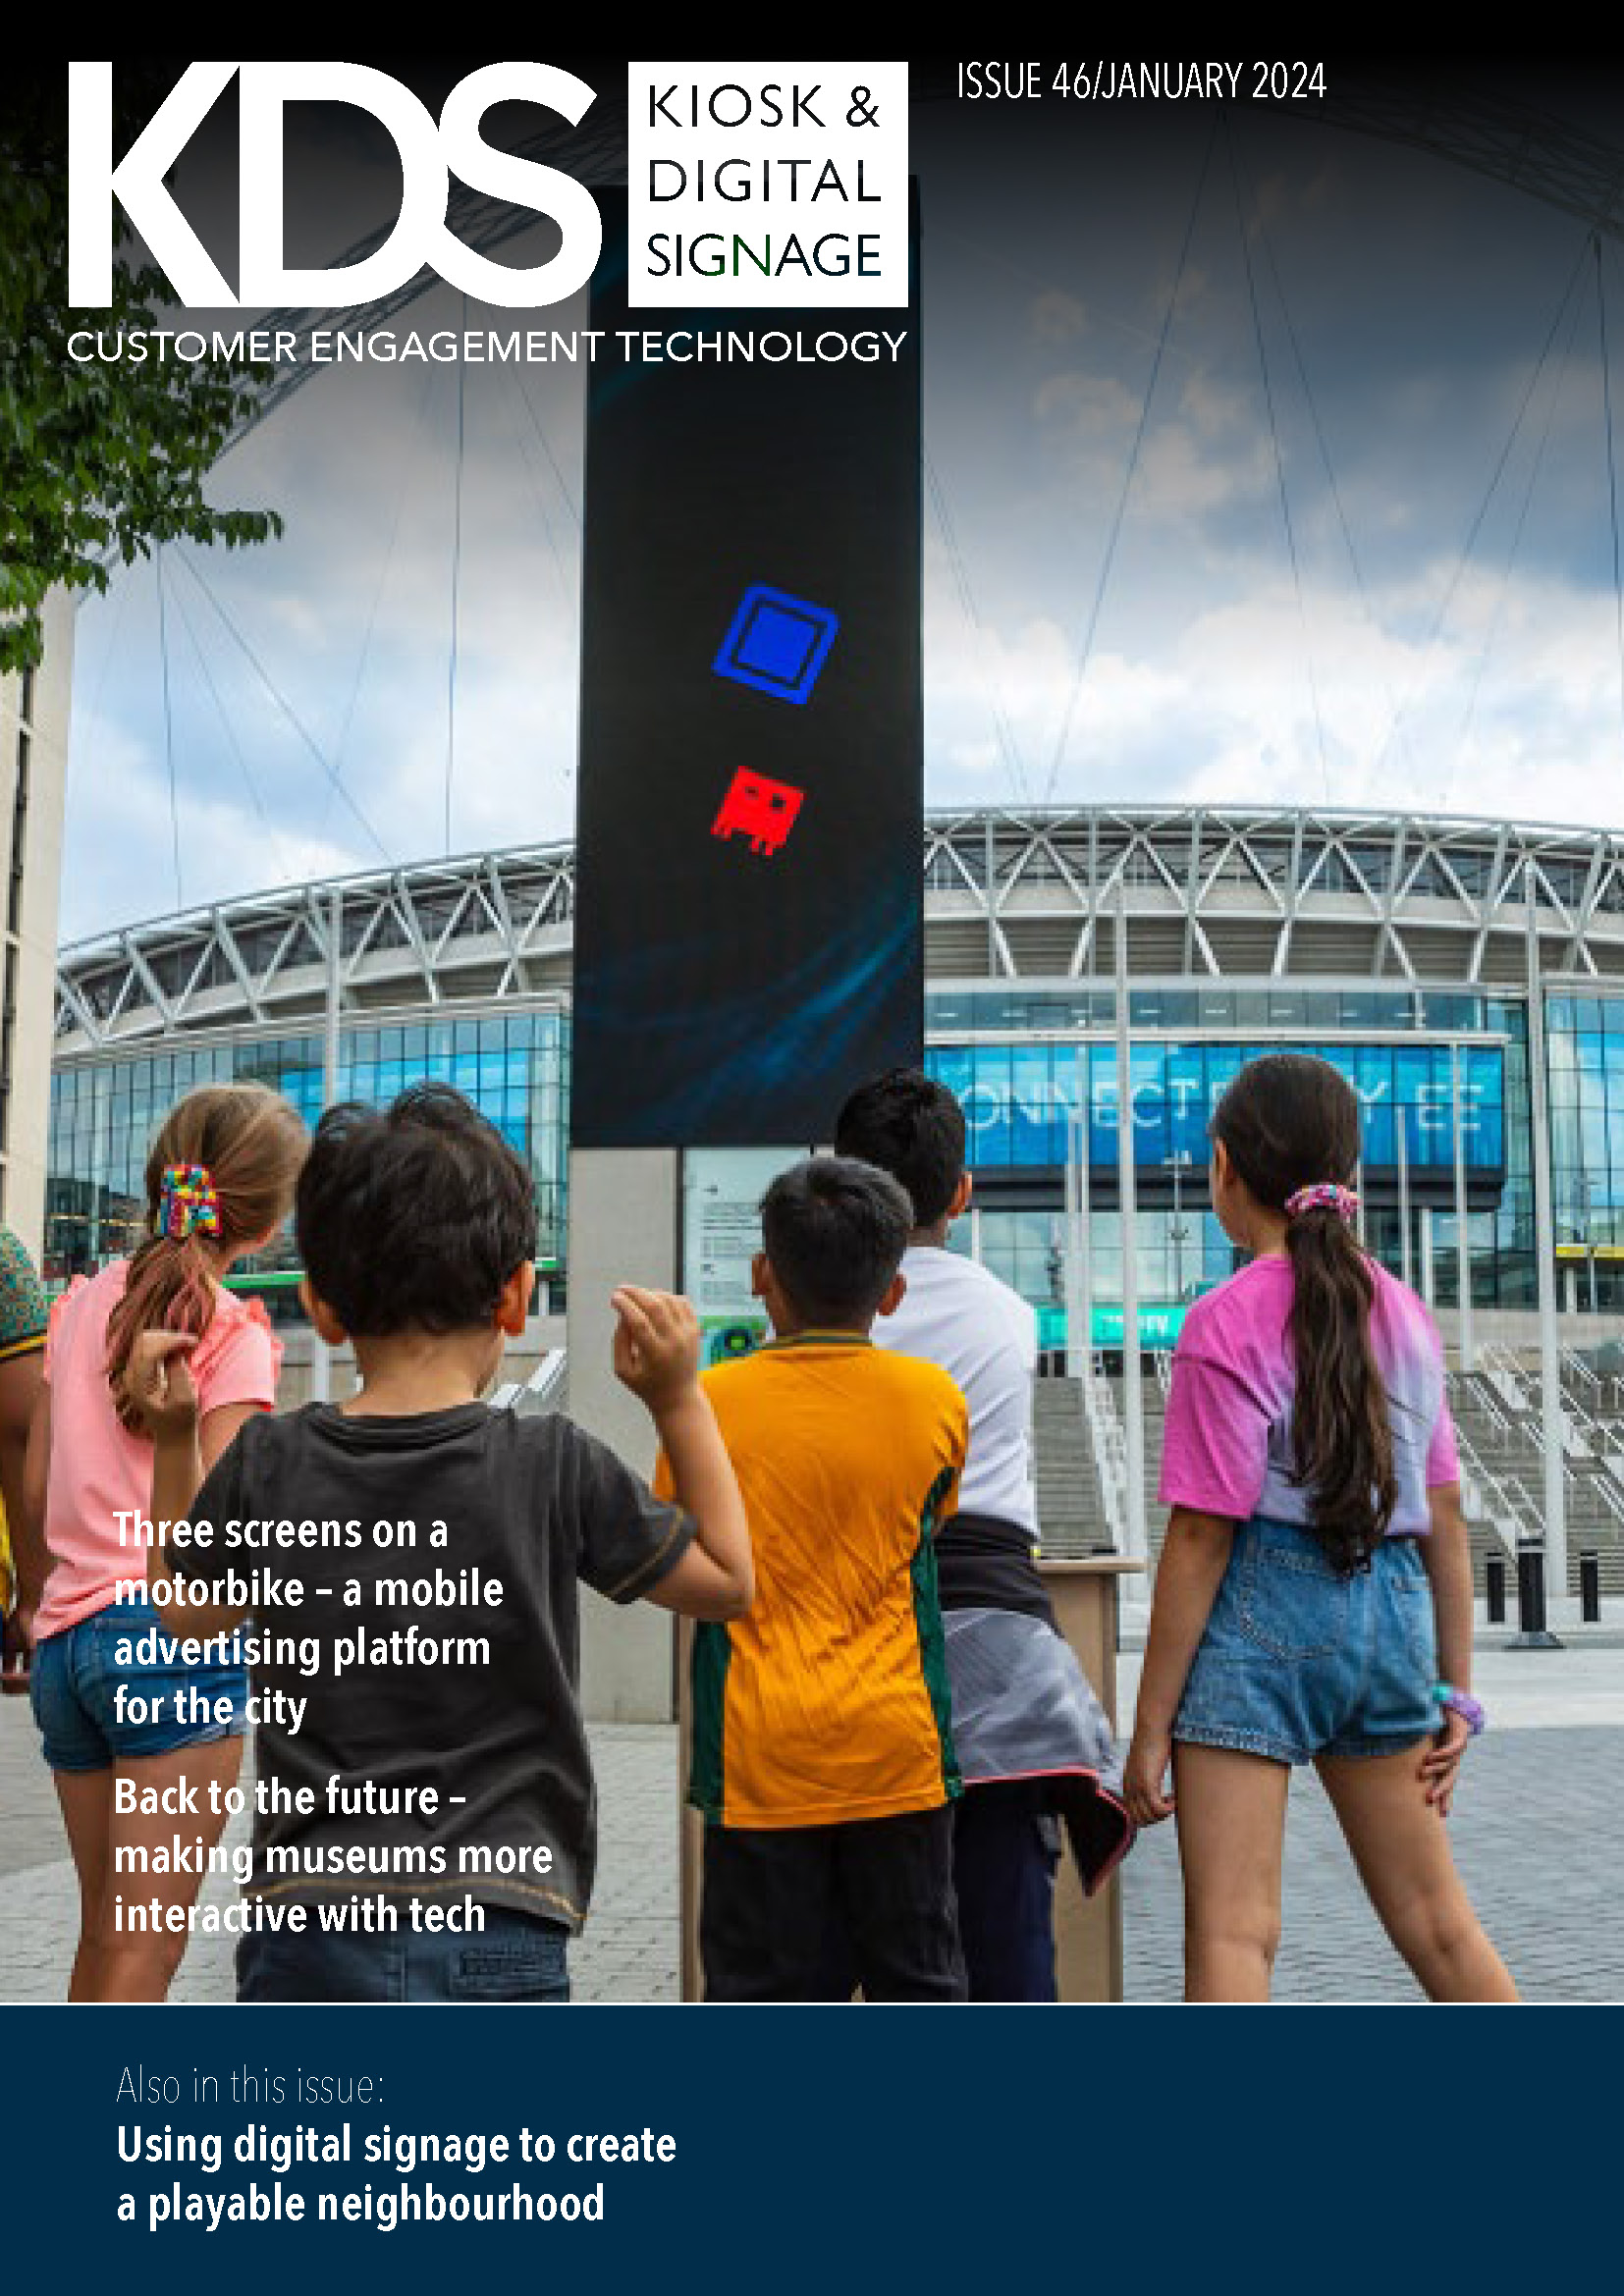 KDS Magazine - December 2023/January 2024 Issue (front cover)